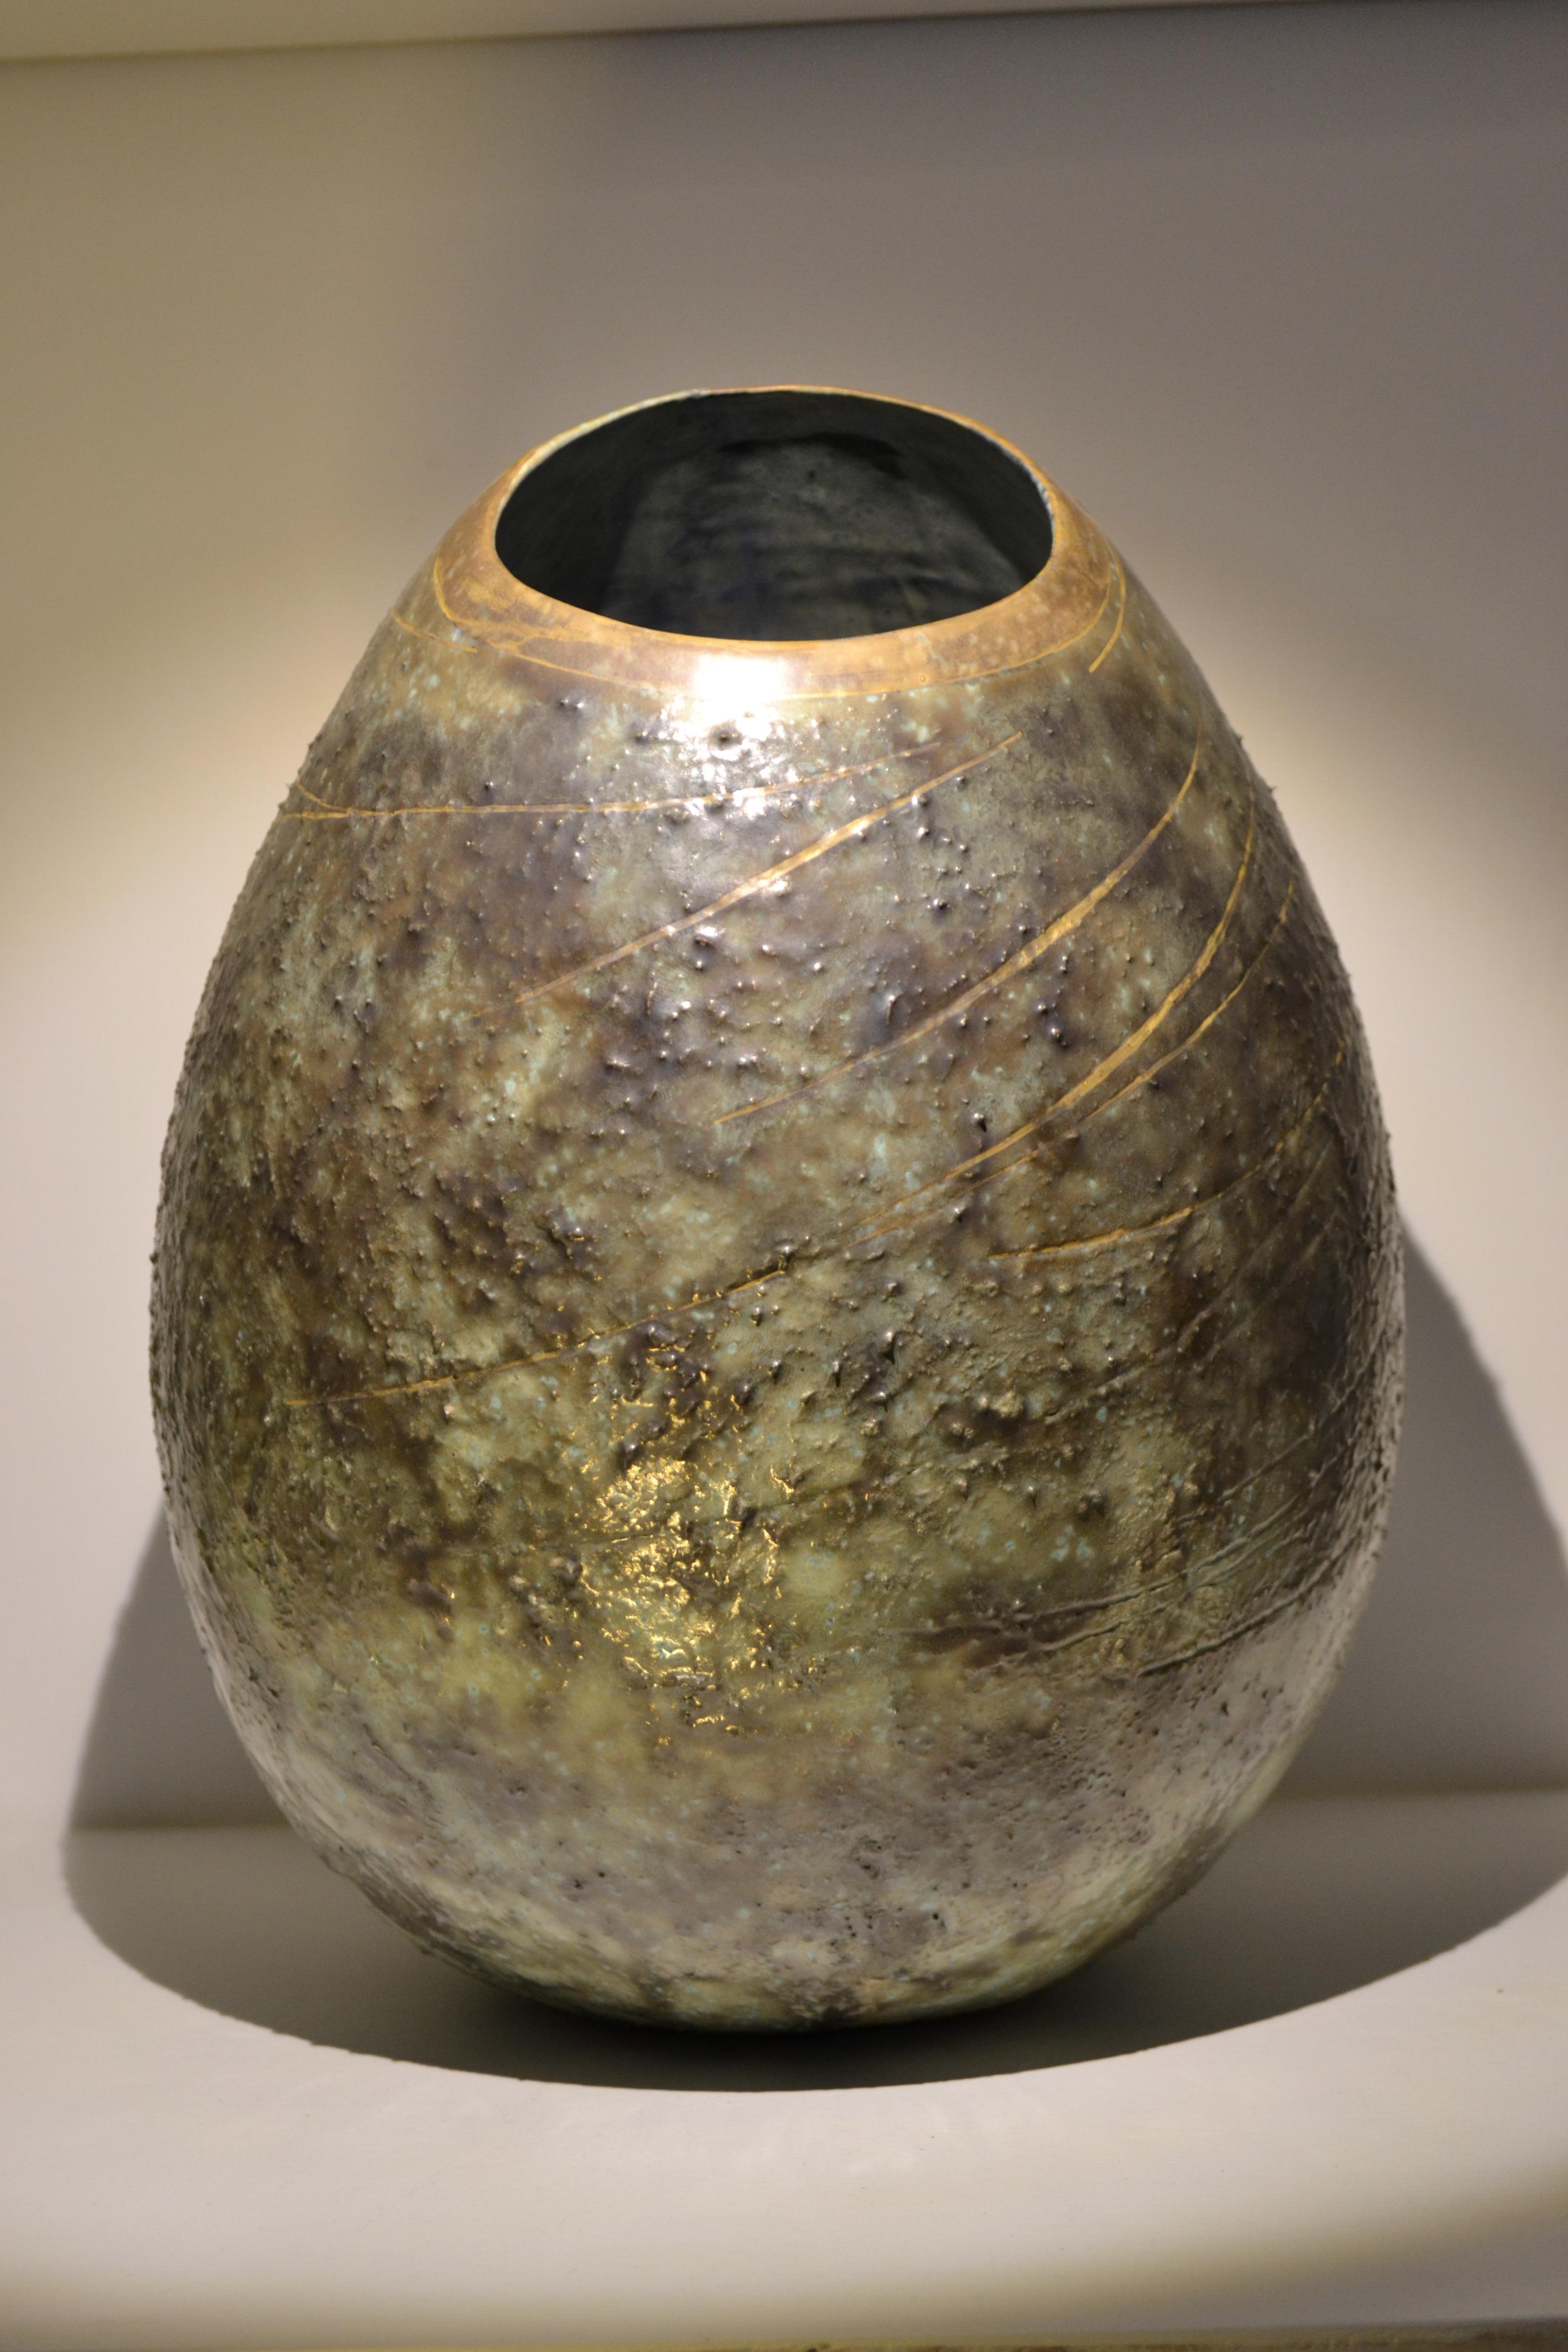 Handmade white clay vase and second-fired green glaze ceramics with brown mottling and oxide. Decorated with engravings and collar in 24k matt gold in 3rd fire.